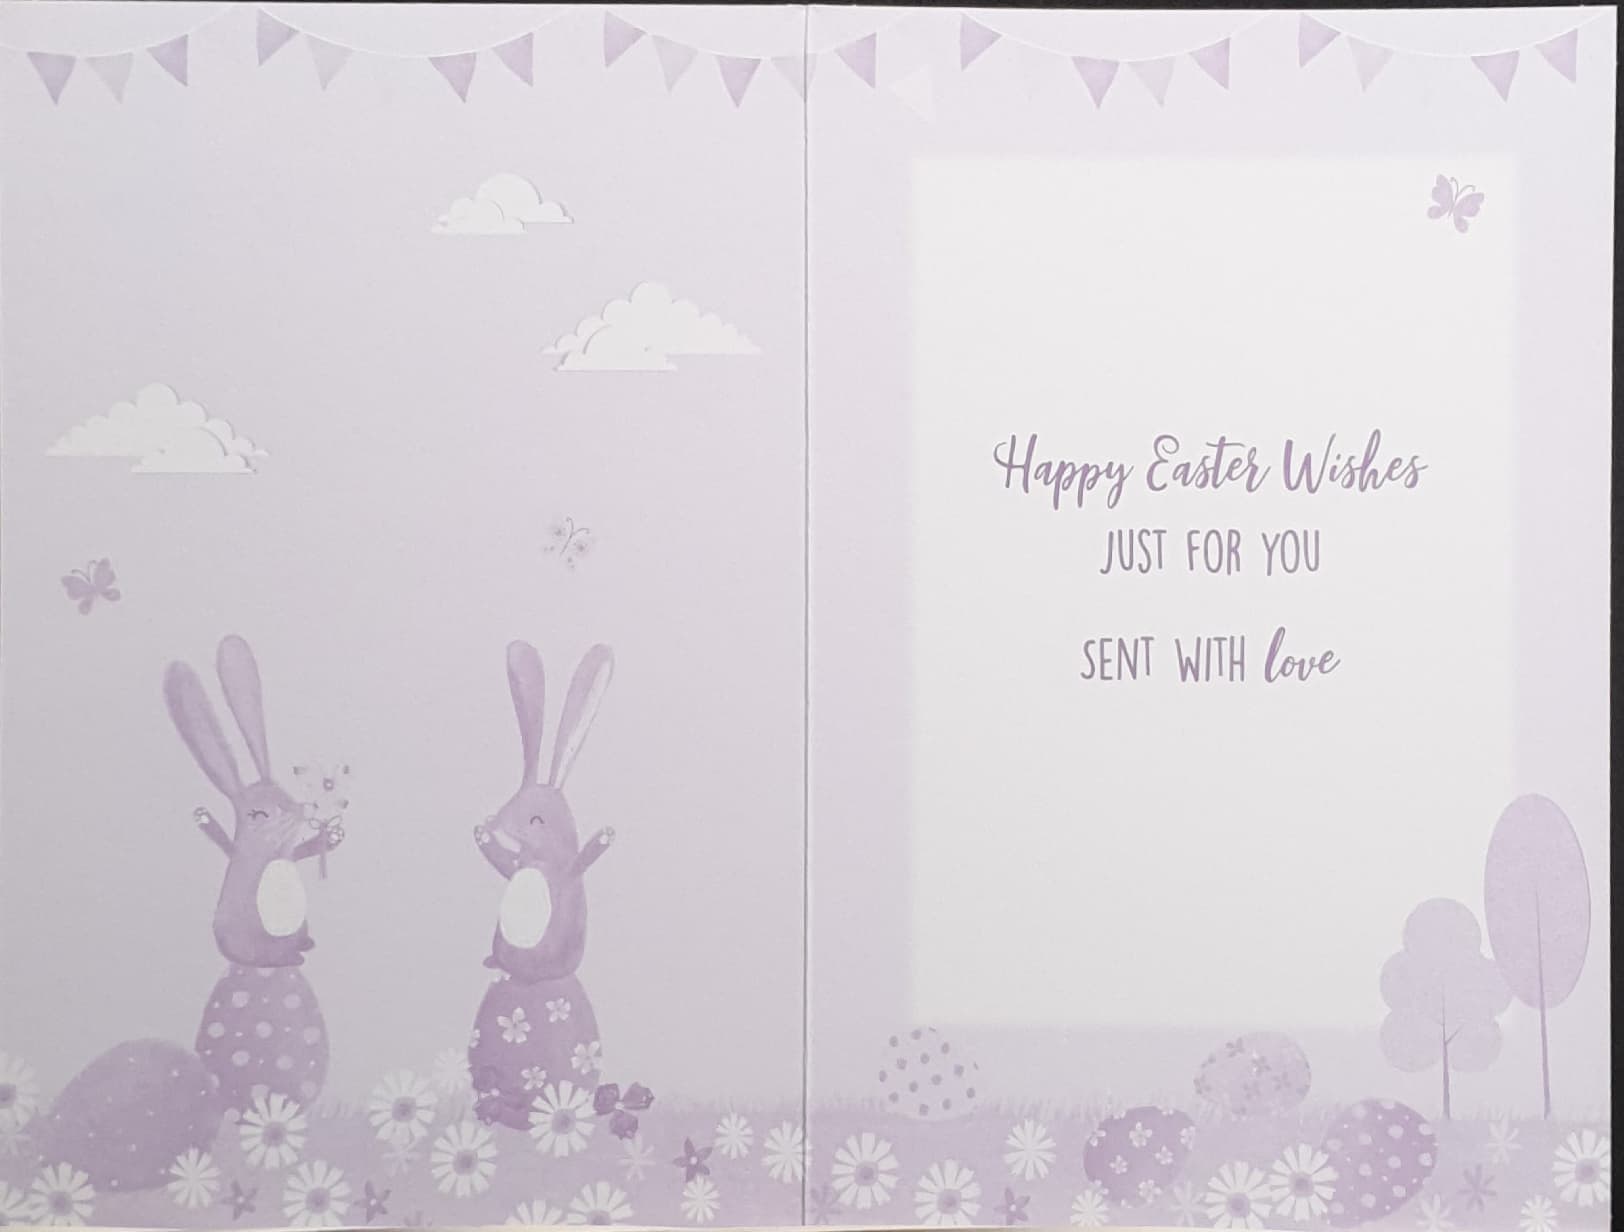 Special Friends - Easter Card / Cute Bunnies Sitting on Big Eggs